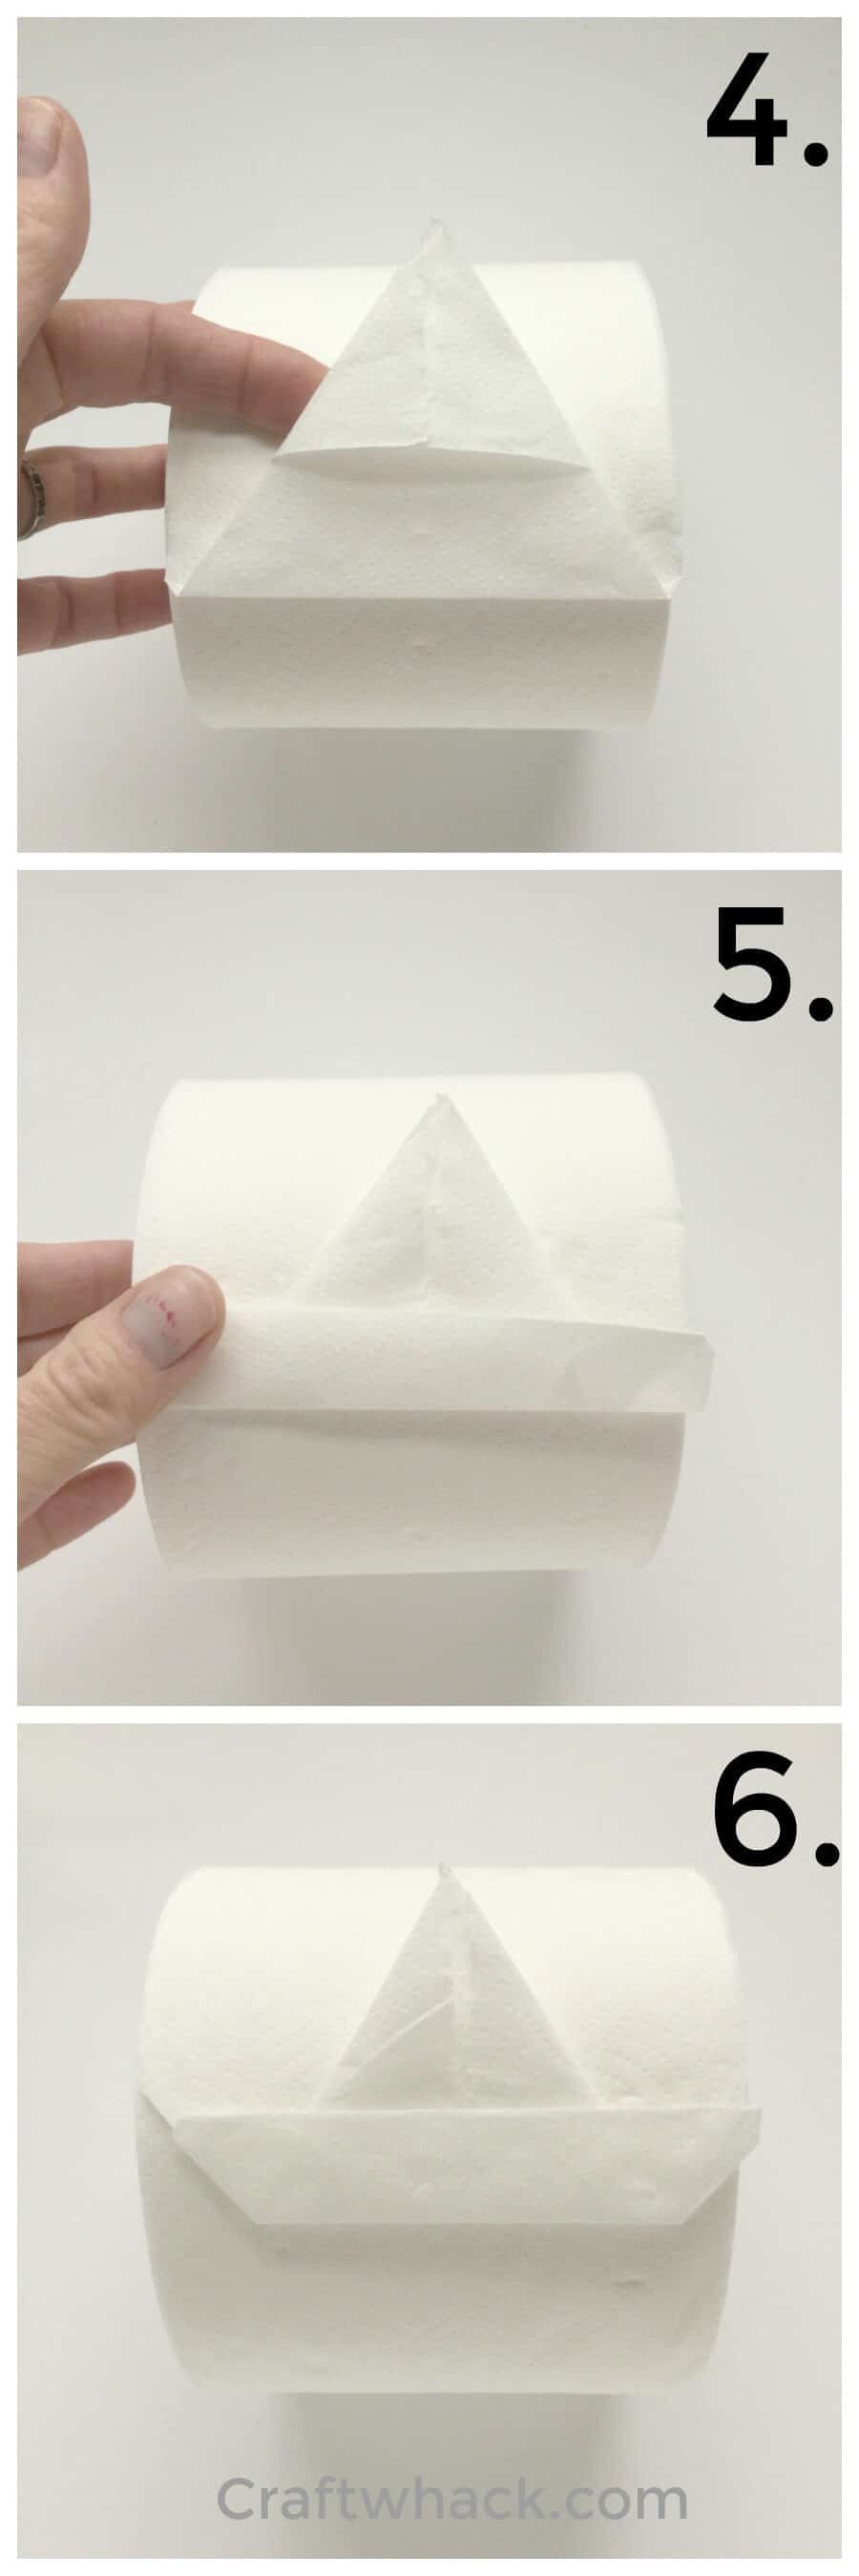 Ahoy Learn To Fold A Toilet Paper Origami Sailboat Craftwhack